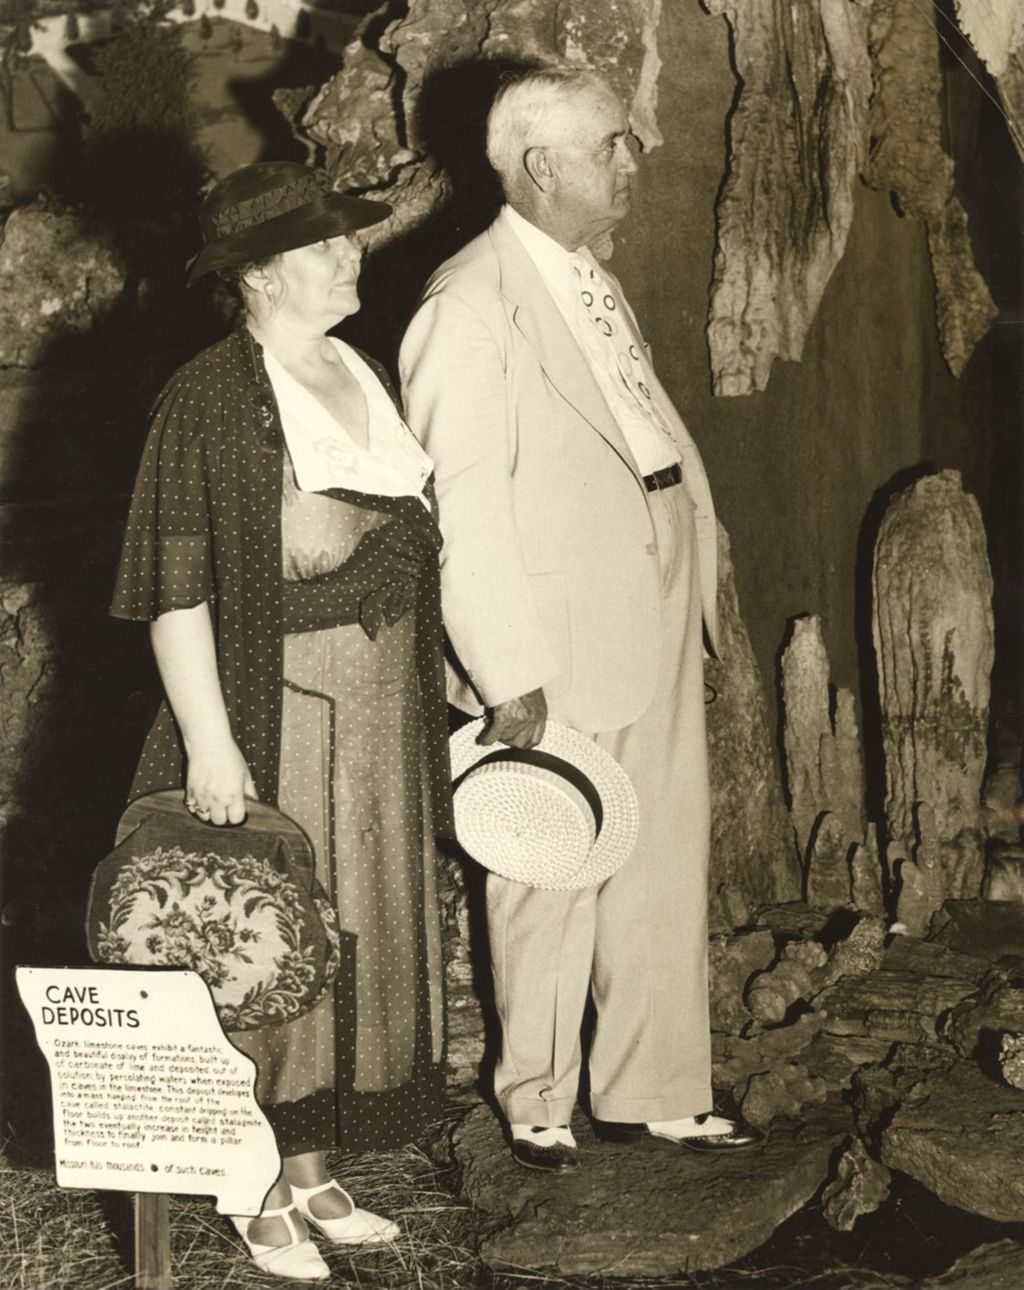 Governor and Mrs. Guy B. Parks of Missouri view exhibit of cave deposits in the Court of States